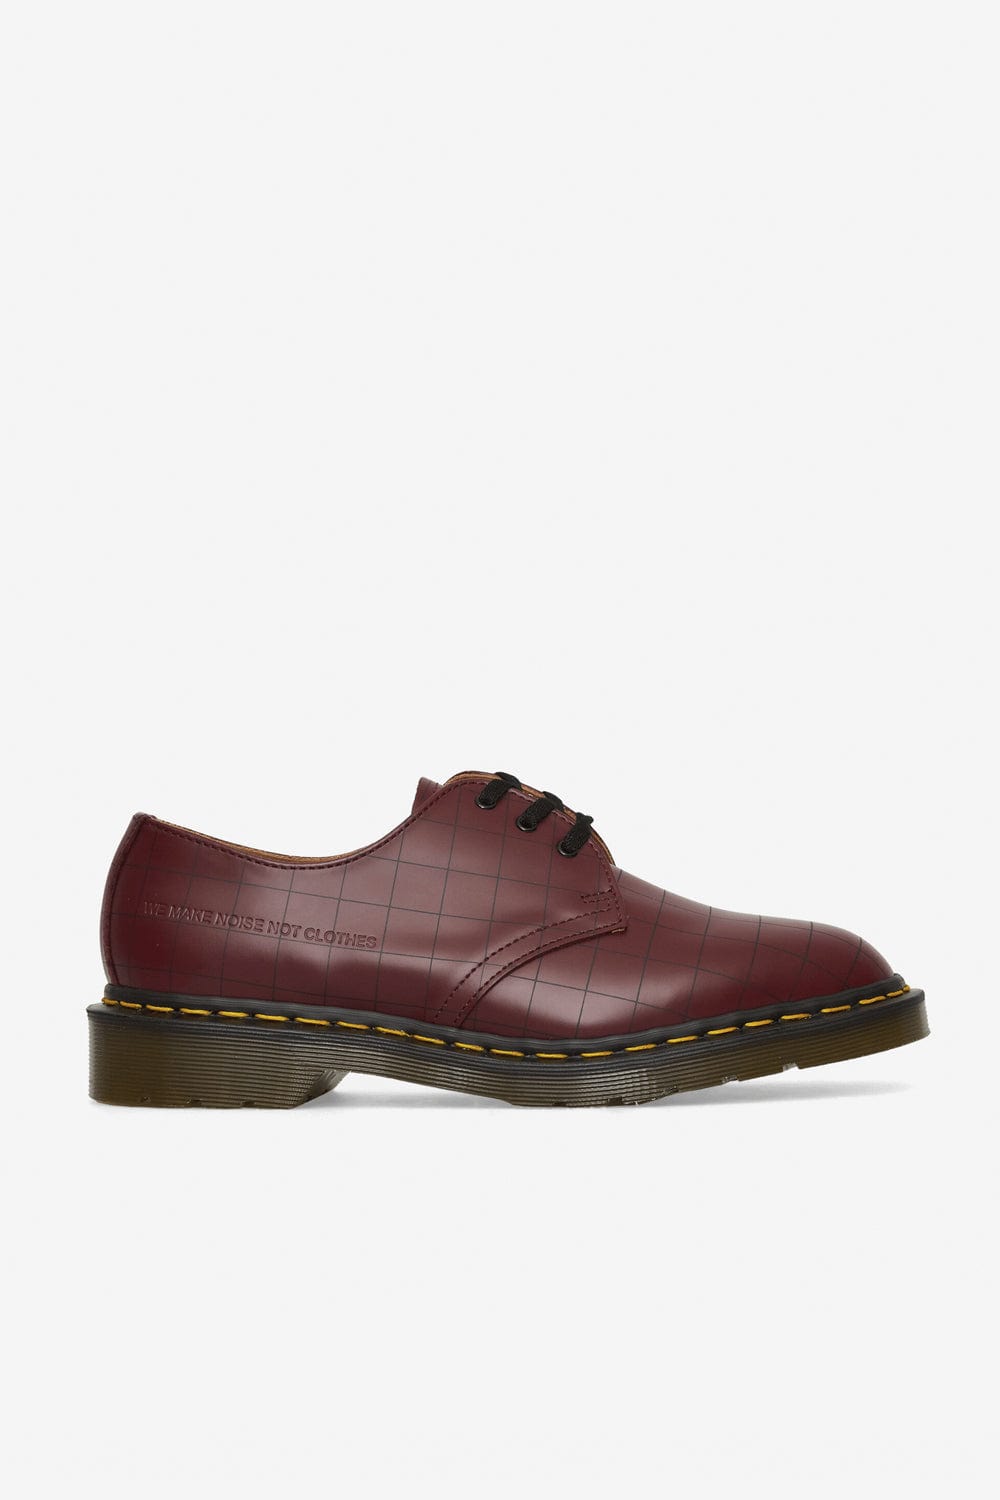 Dr. Martens x Undercover 1461 UC Check (Cherry Red Smooth)